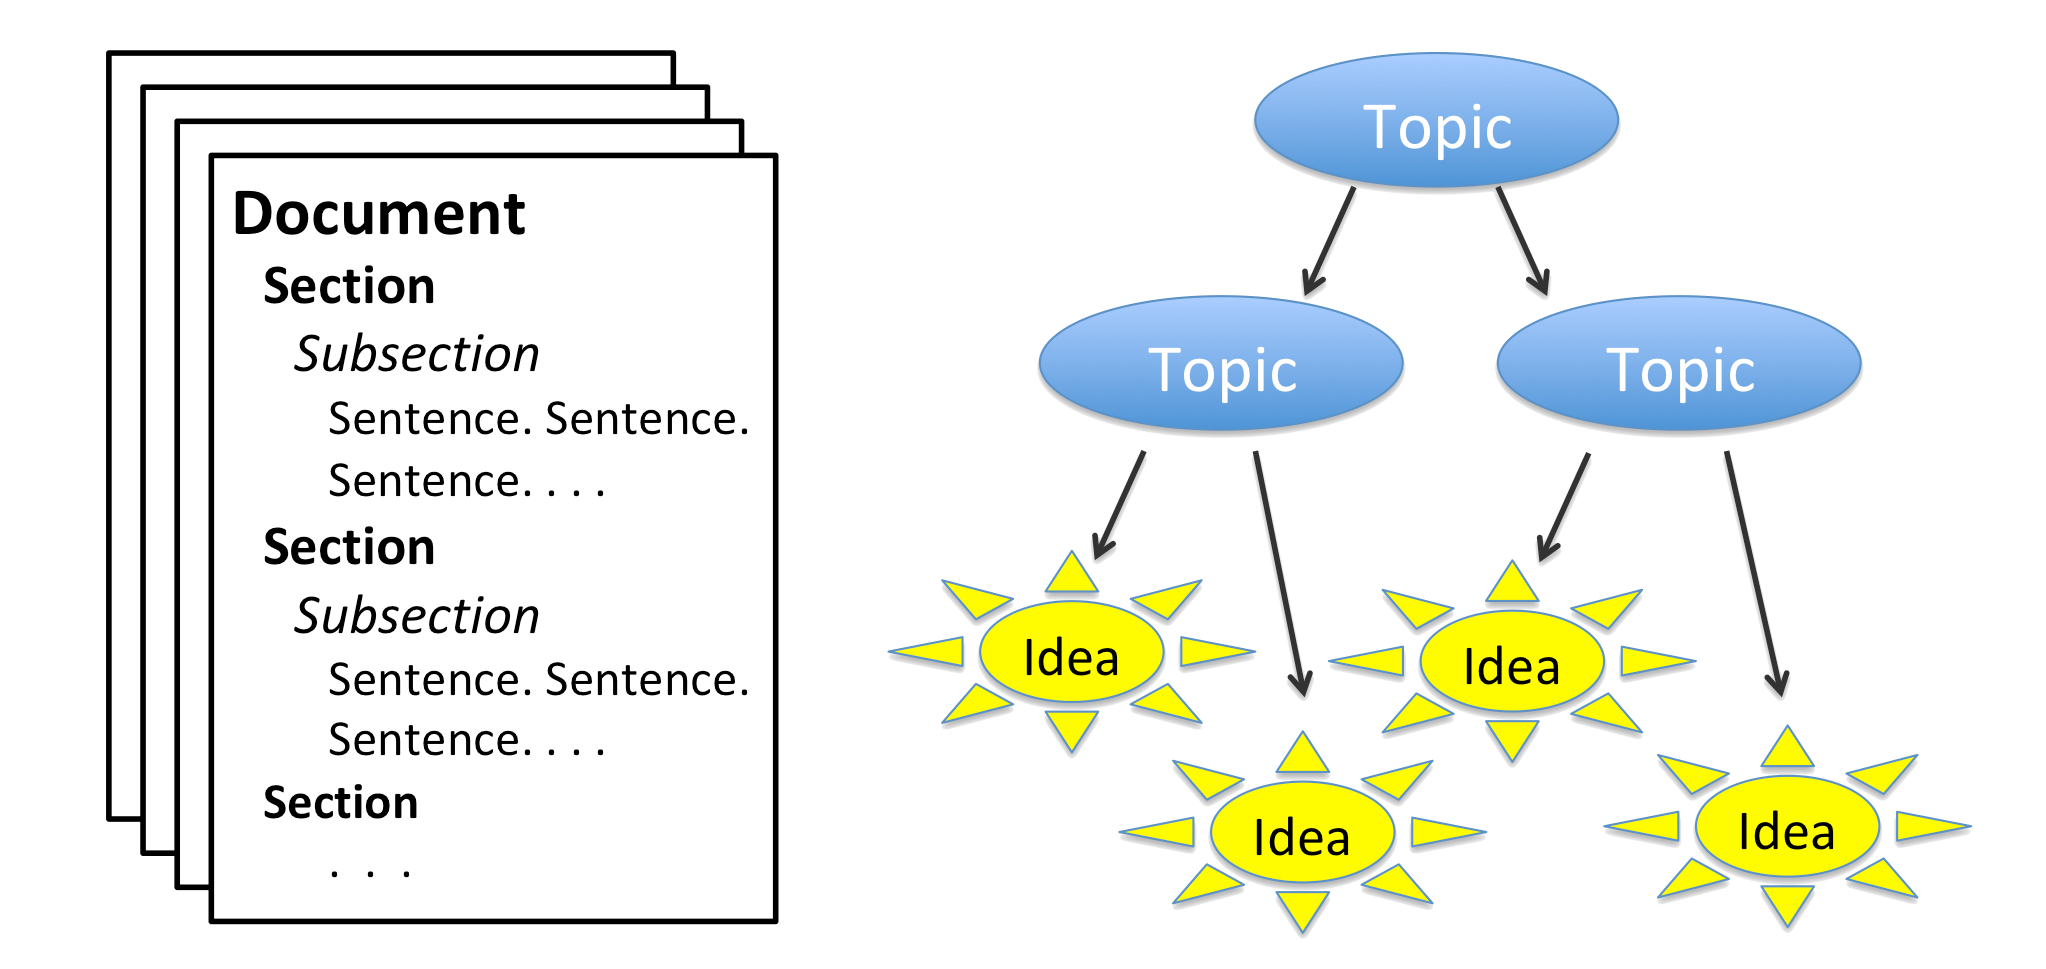 Topics and ideas from sections and sentences